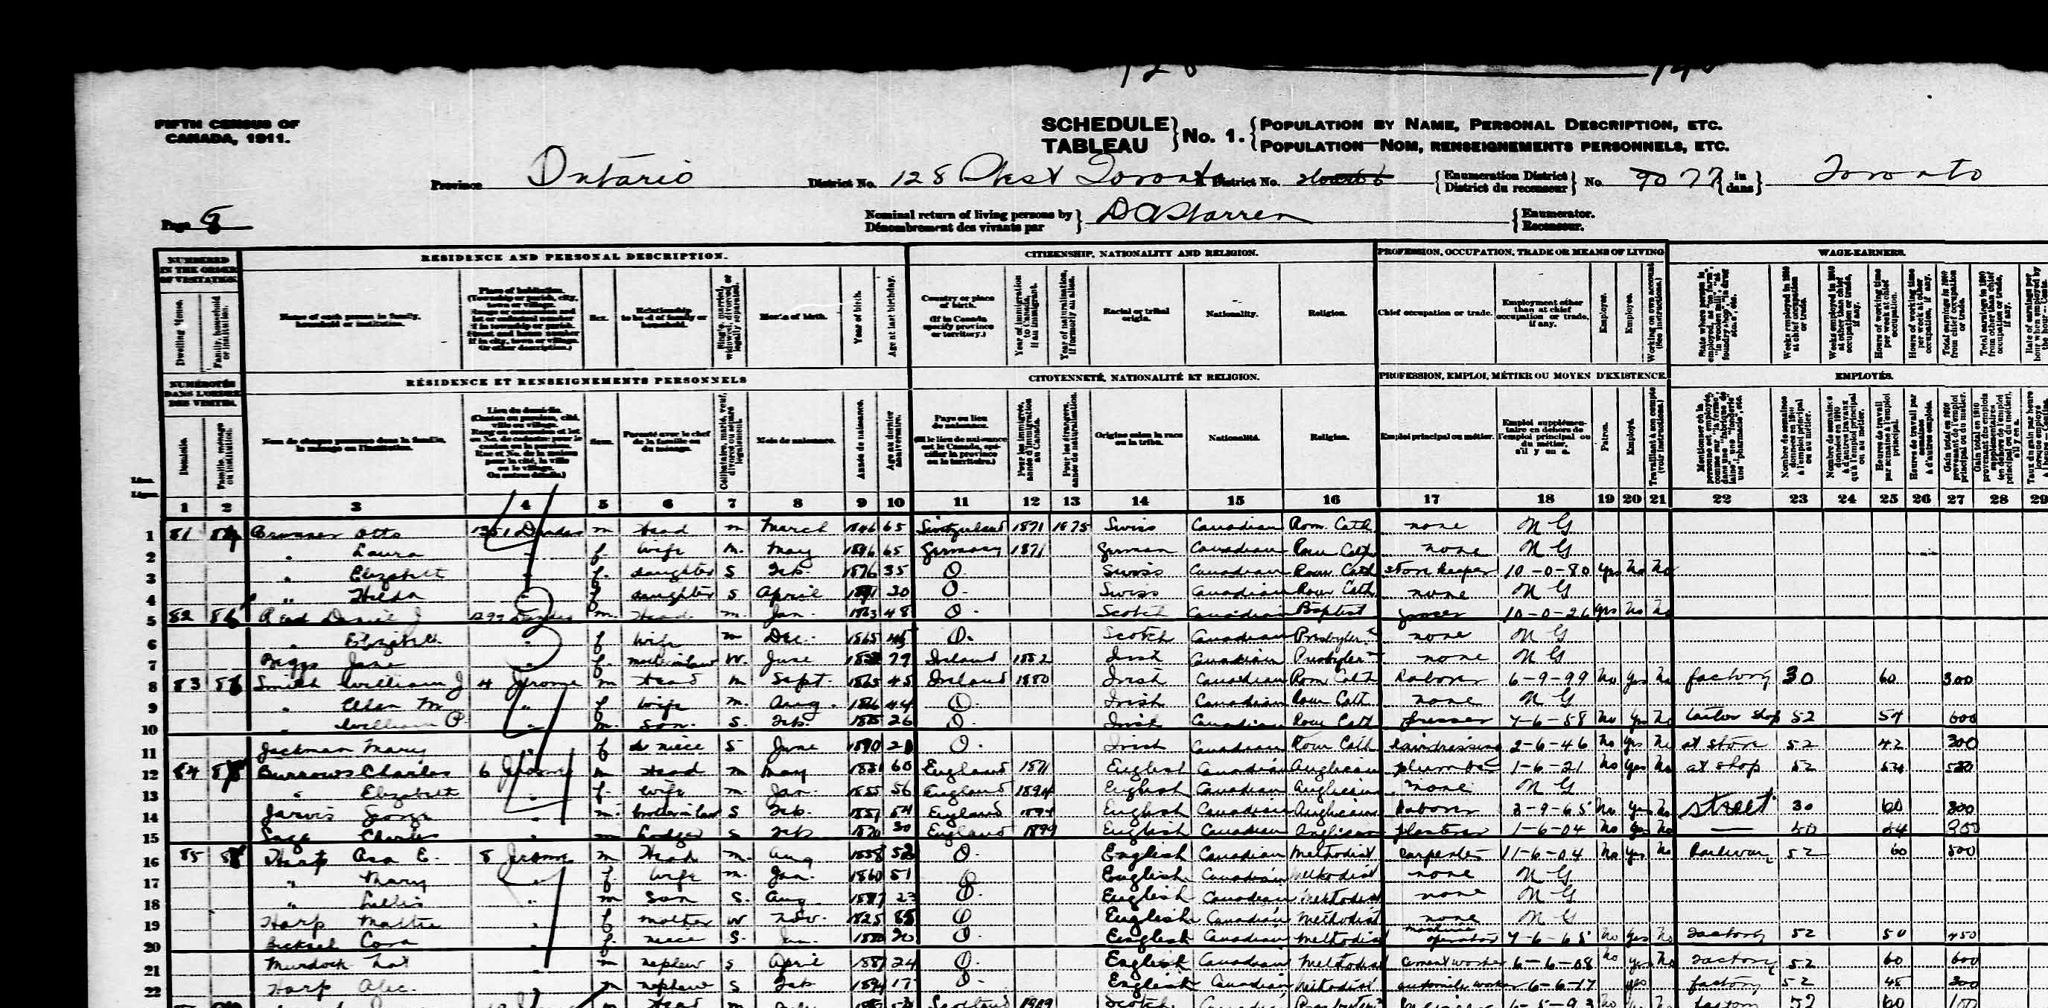 1911 Otto Brunner Candian Census